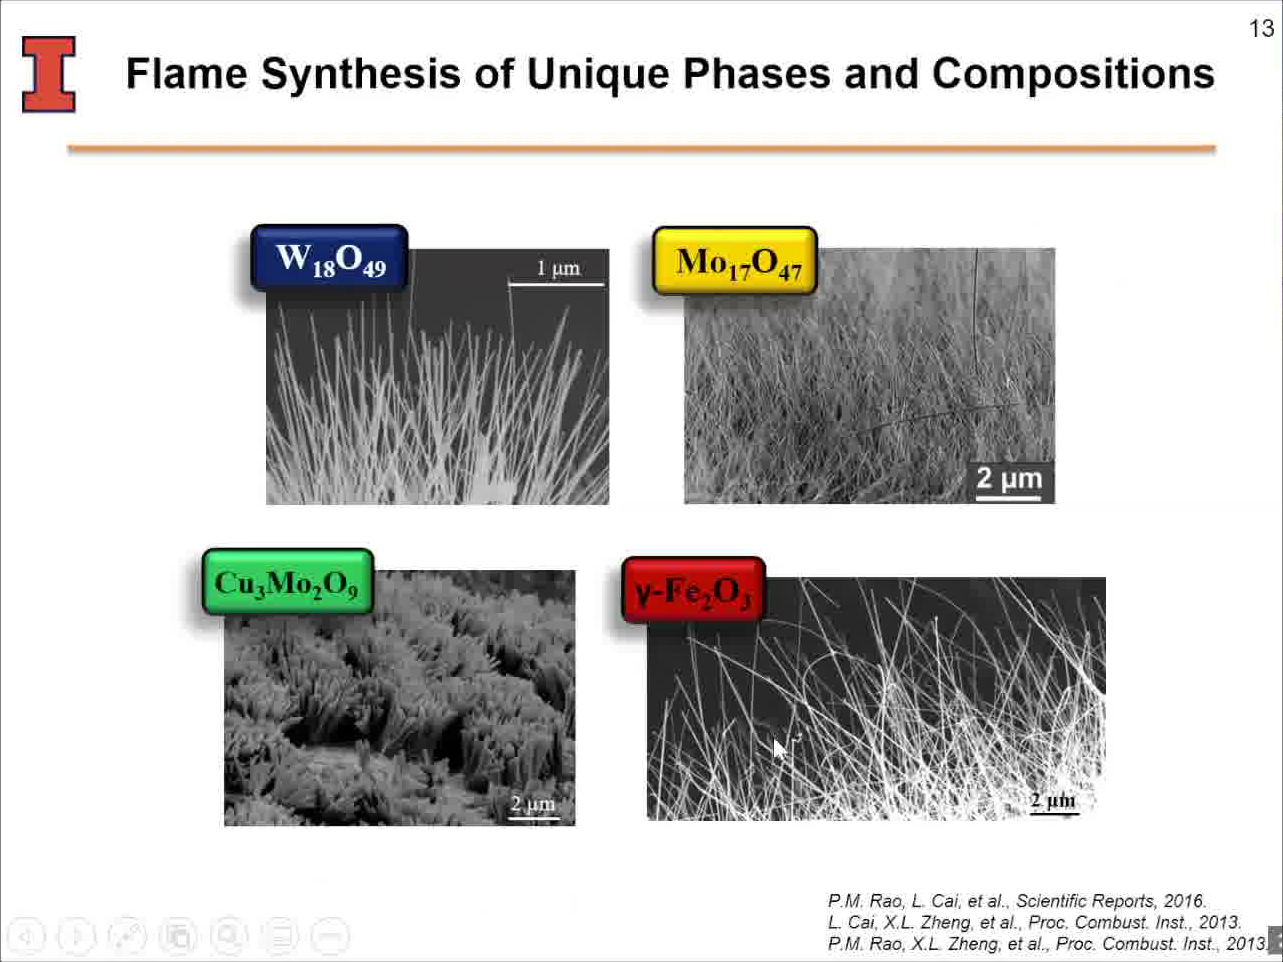 Flame Synthesis of Unique Phases and Compositions